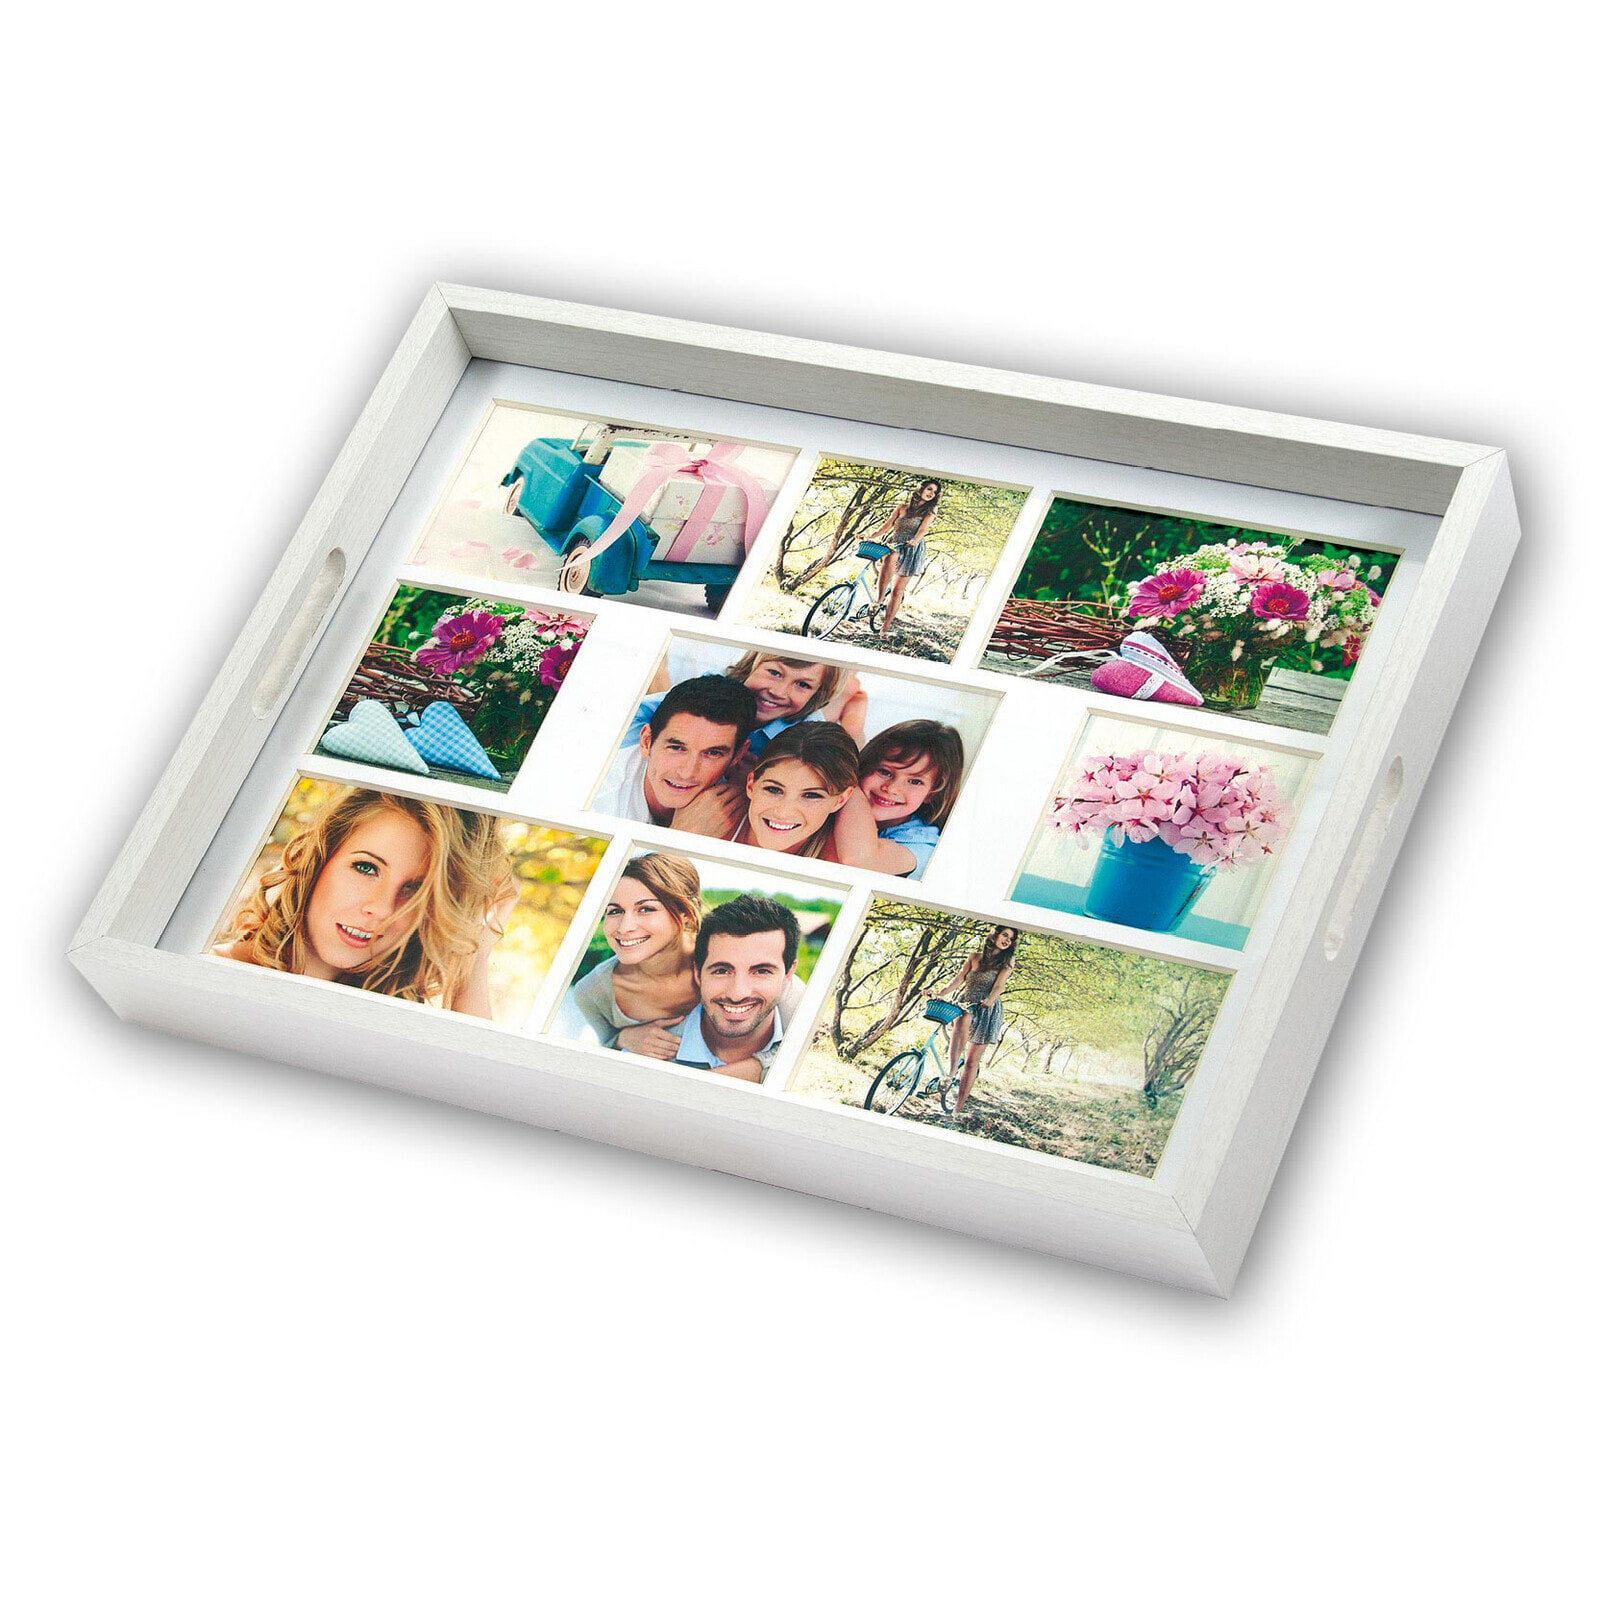 Zep W006 - Wood - White - Multi picture frame - Wall - 10 x 10 cm - Rectangular